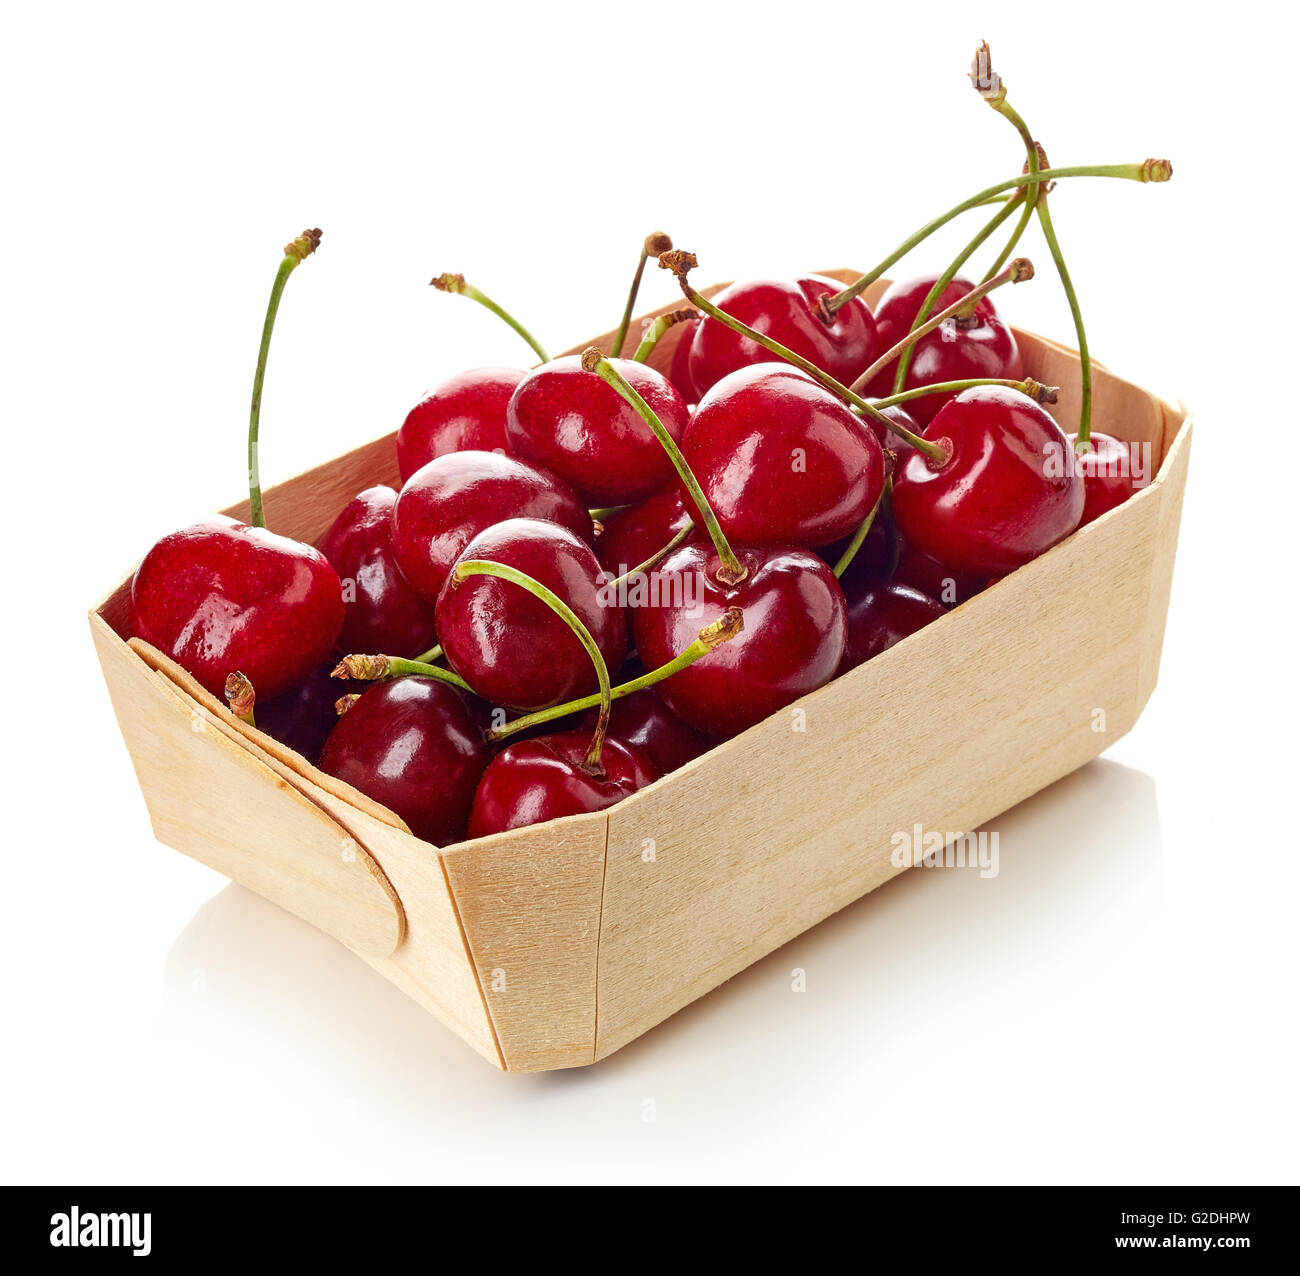 cherry in wooden container box, isolated on white background Stock Photo